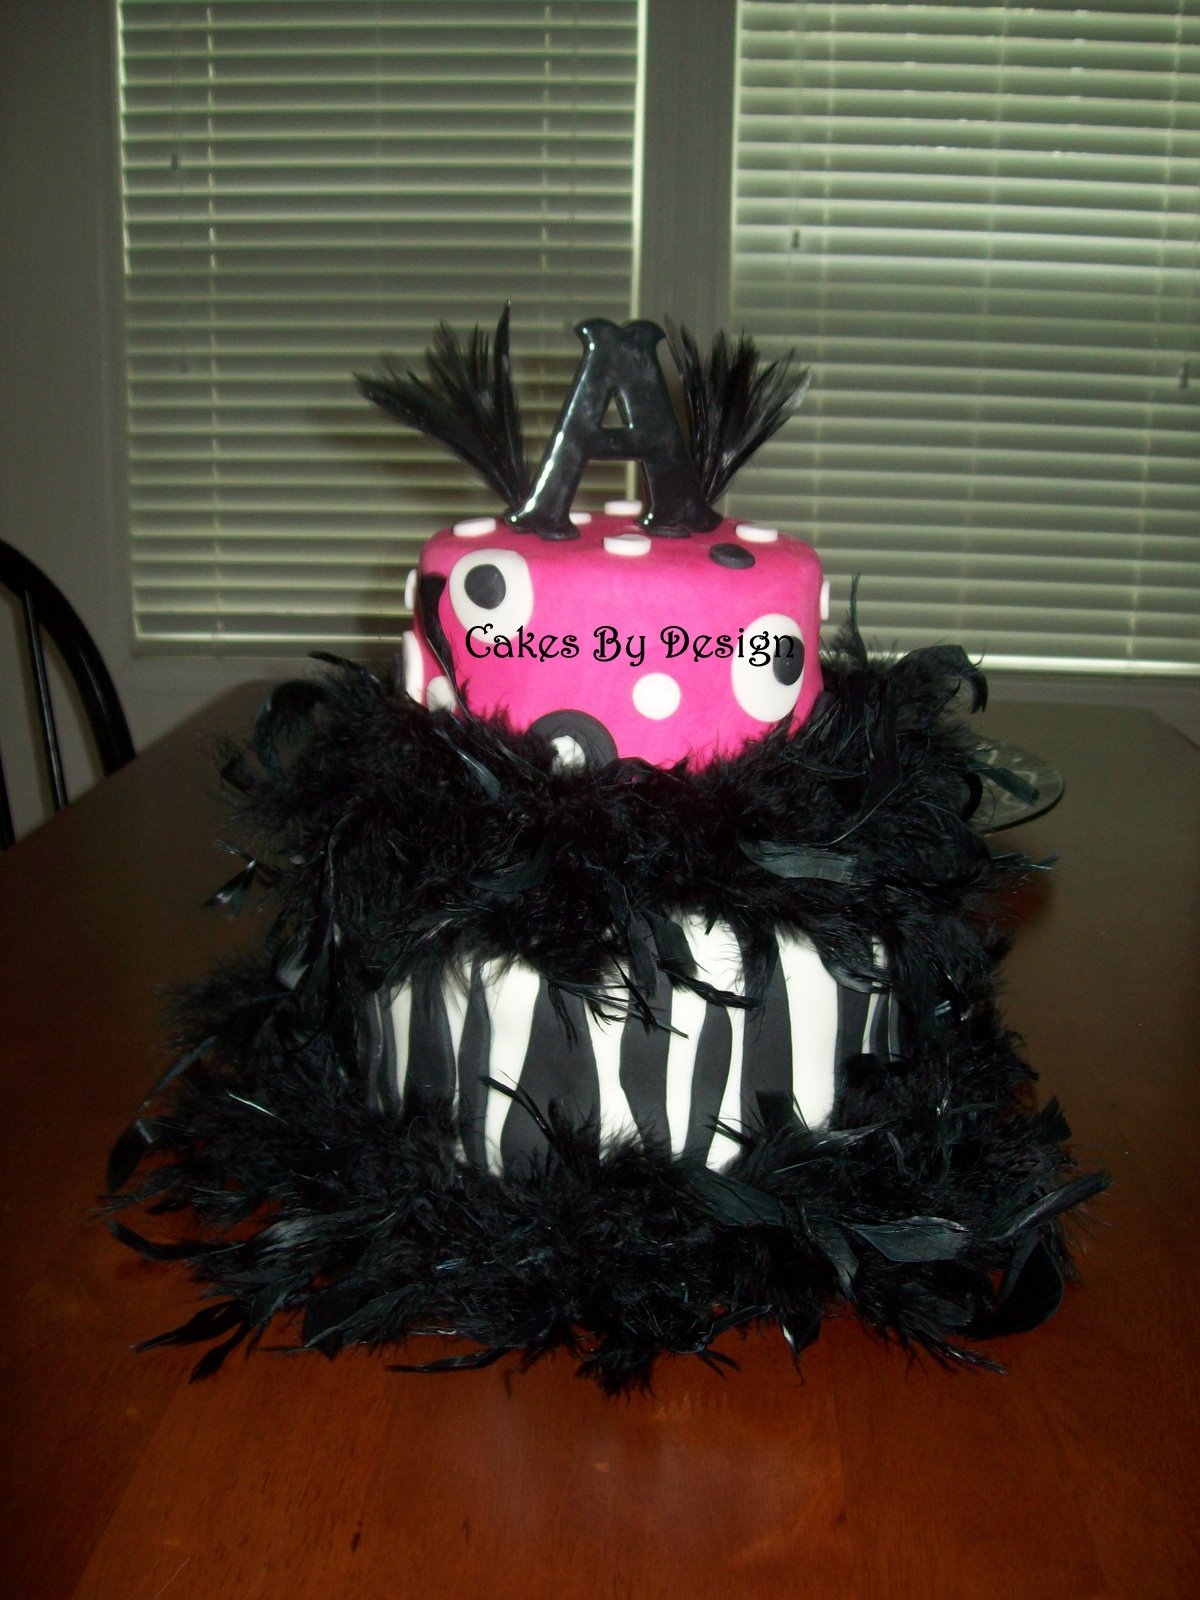 ... Feather Boa Cake. This is a 6 inch and 8 inch stacked cake covered